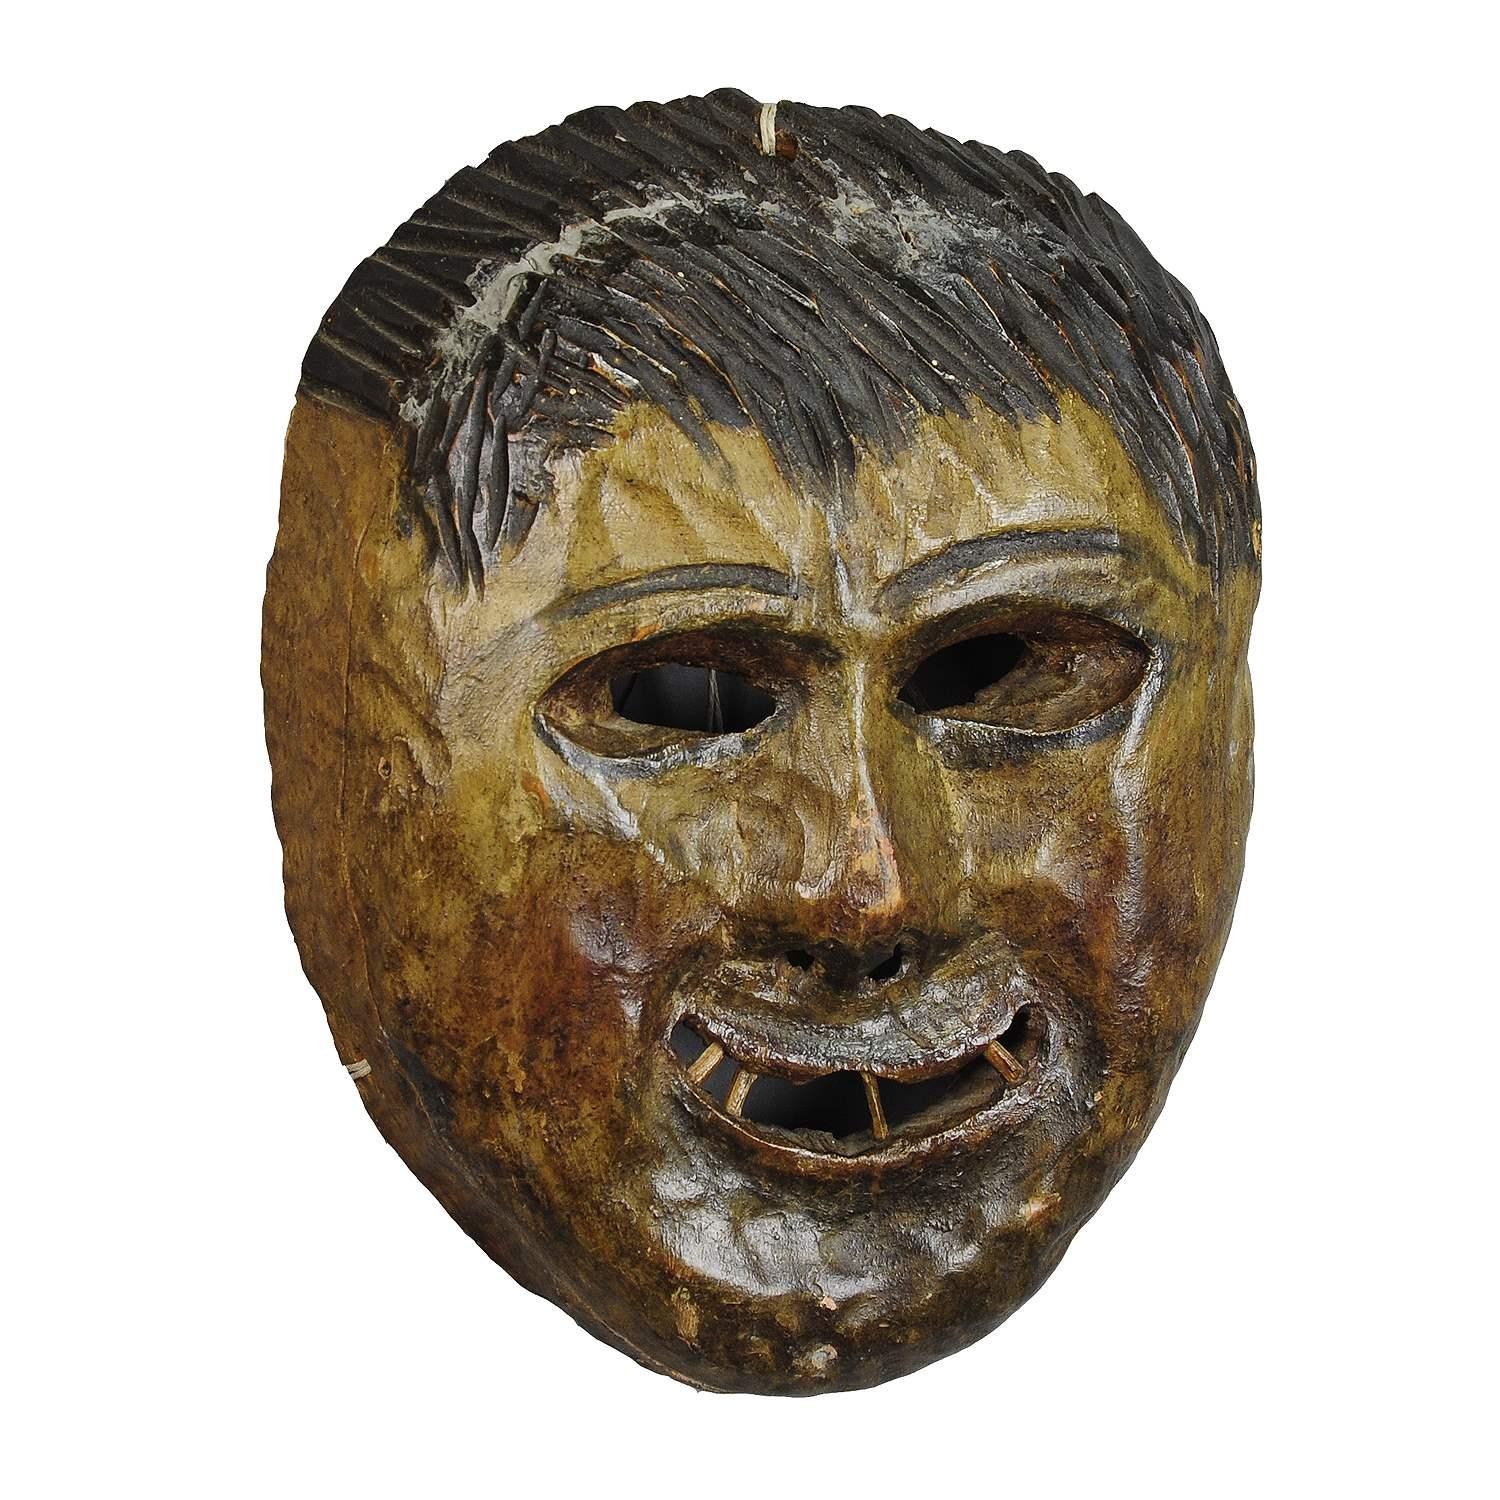 Folksy Hand Carved Tyrolian Carnival Fasnet Mask

A folksy wooden carved carnival mask from the region of South Tyrol. These masks are used in Austria, South Germany and Italy at the carnival “Fasnacht” activities to chase away winter. Handcarved